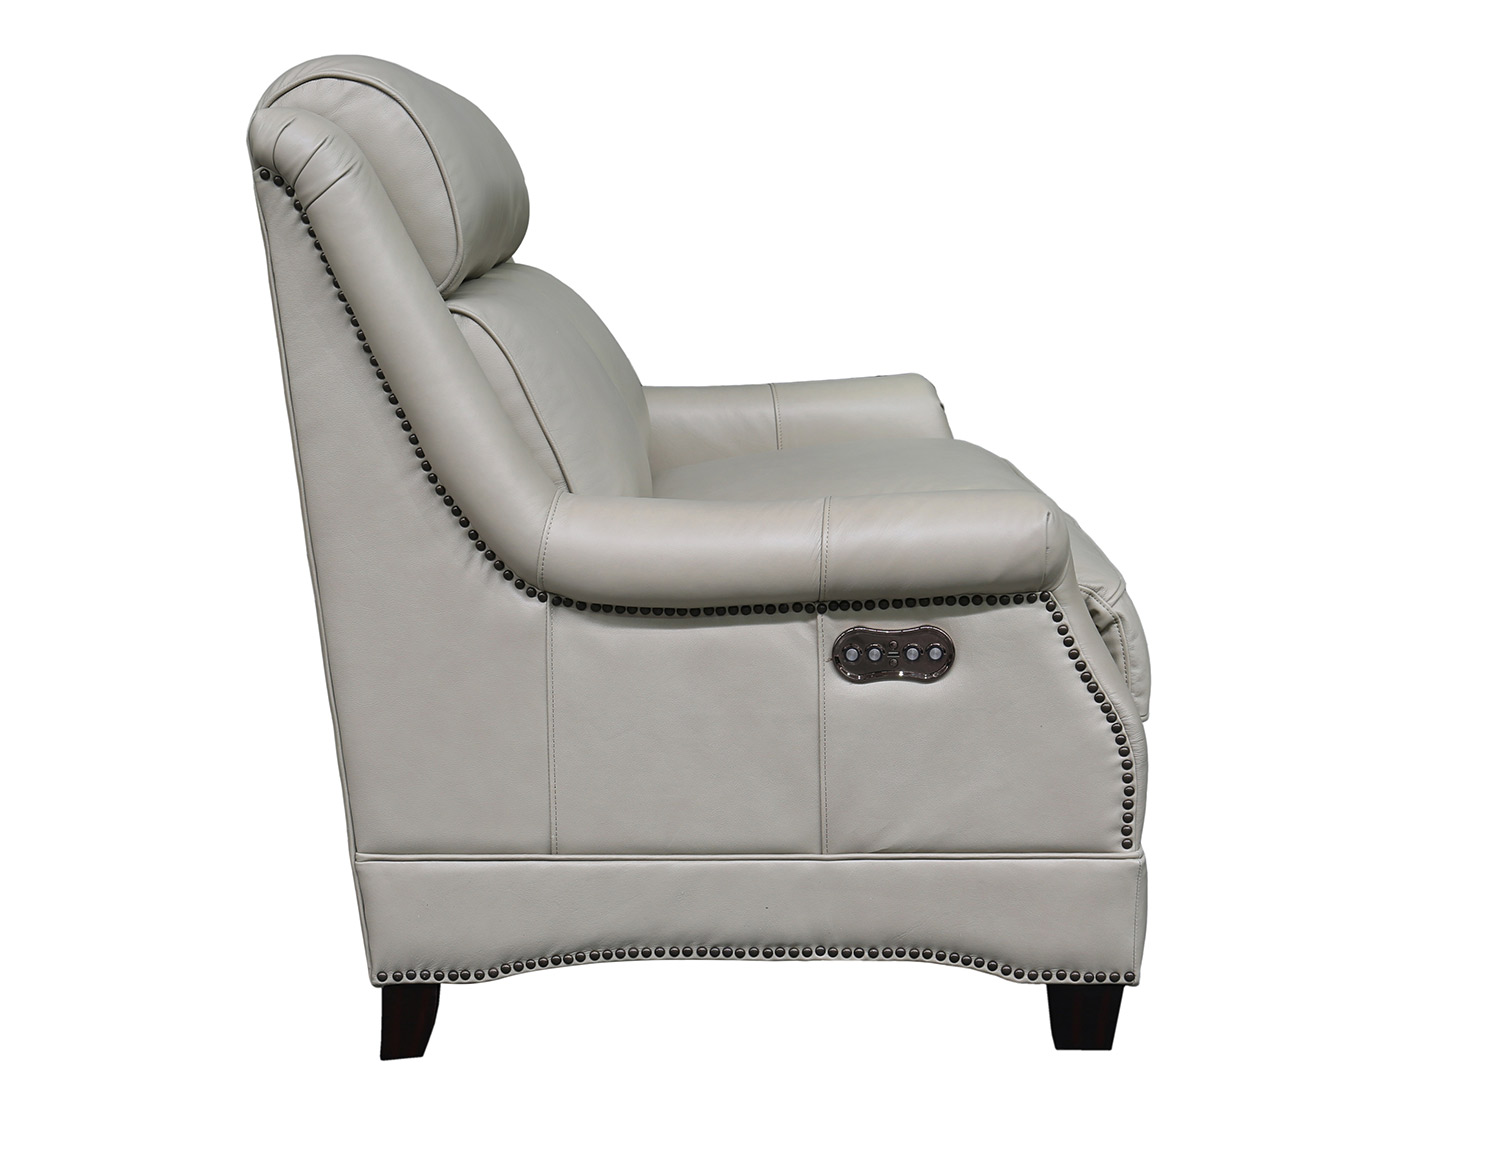 Barcalounger Warrendale Power Reclining Loveseat with Power Head Rests - Shoreham Cream/All Leather